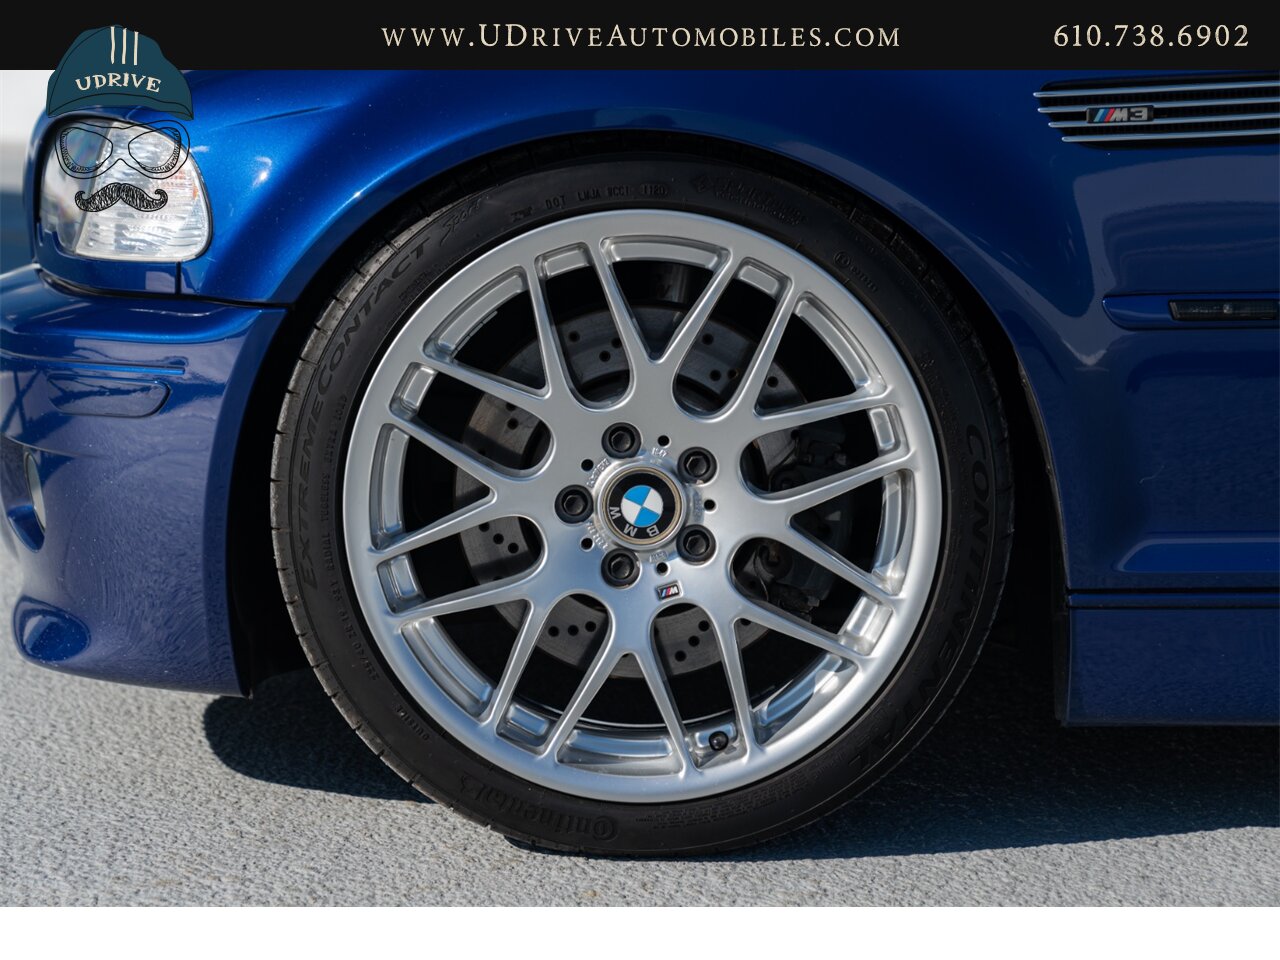 2006 BMW M3 E46 6 Speed Manual Competition Pkg Interlagos Blue  Cinnamon Leather - Photo 51 - West Chester, PA 19382